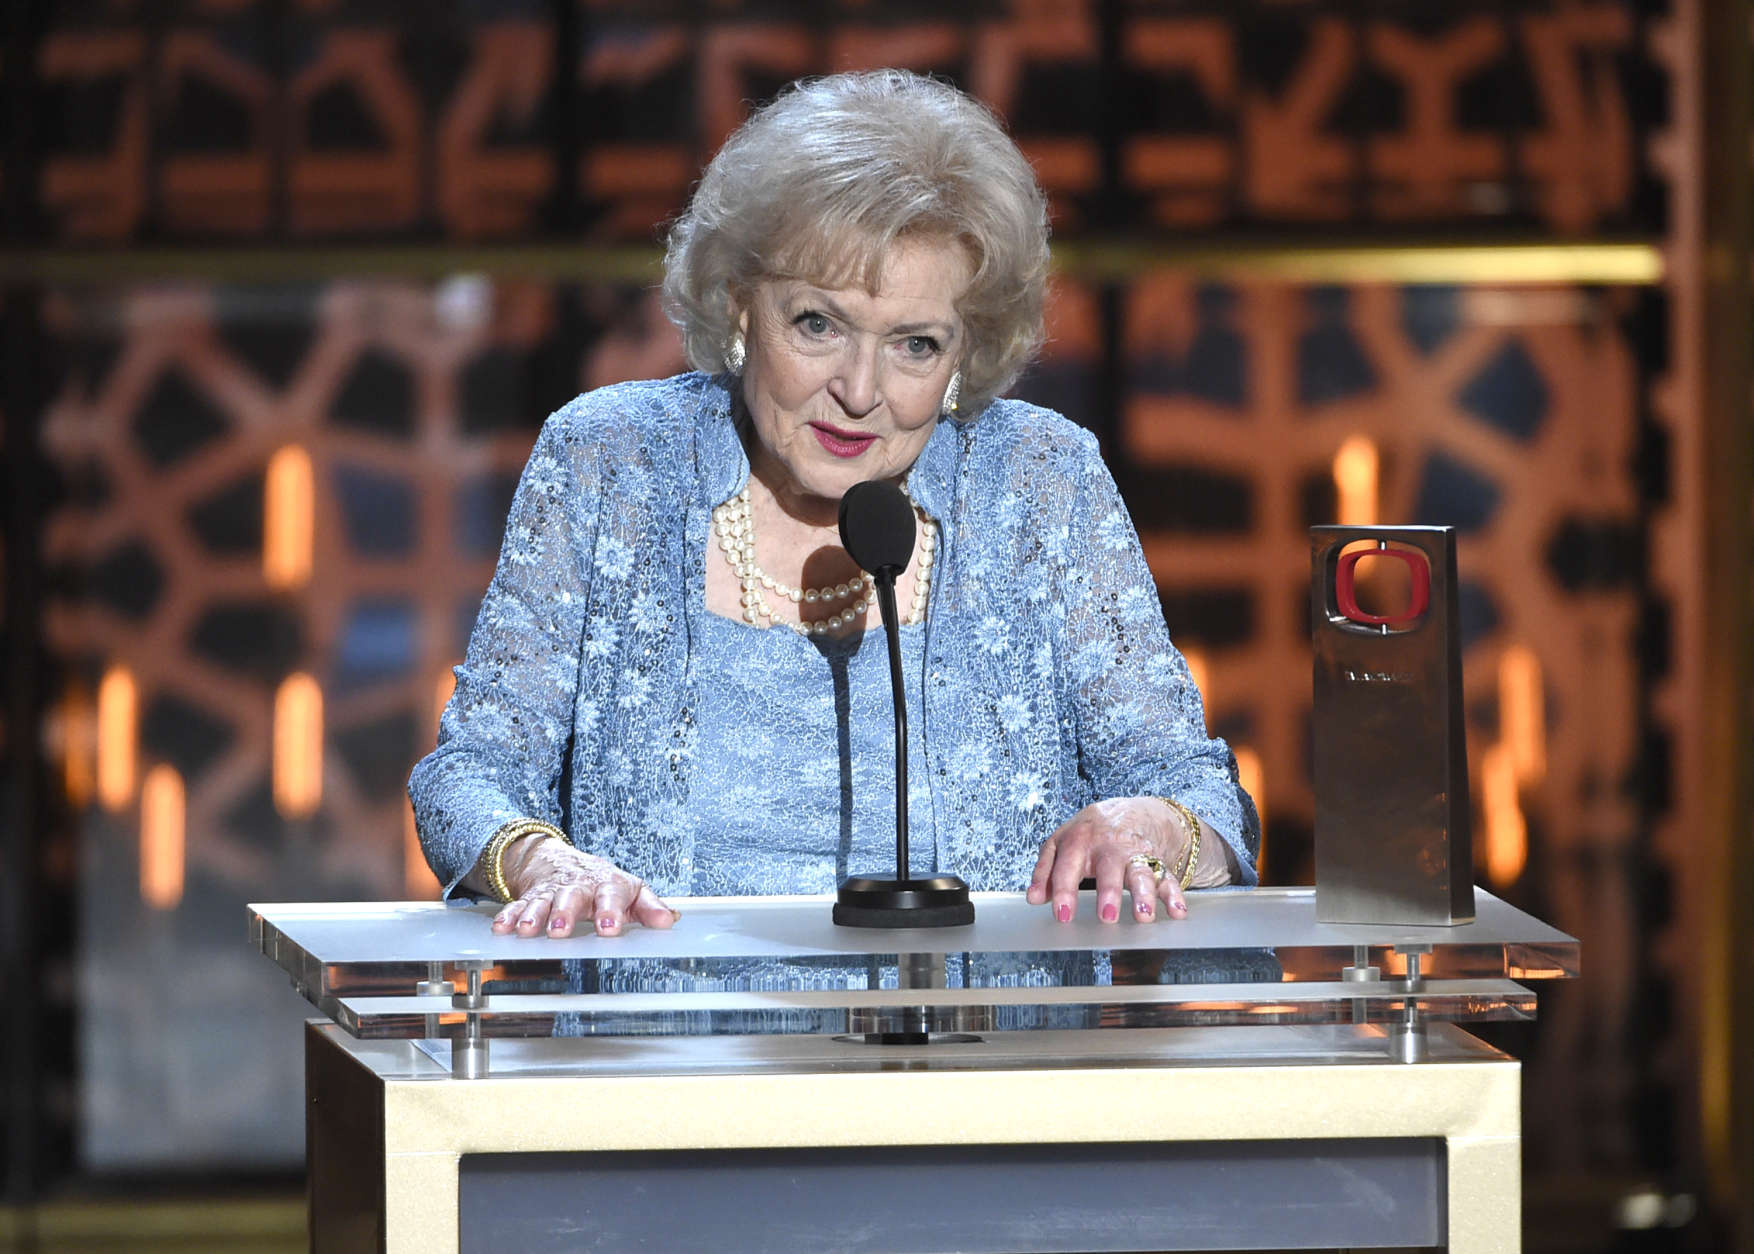 Betty White accepts the legend award at the TV Land Awards at the Saban Theatre on Saturday, April 11, 2015, in Beverly Hills, Calif. (Photo by Chris Pizzello/Invision/AP)